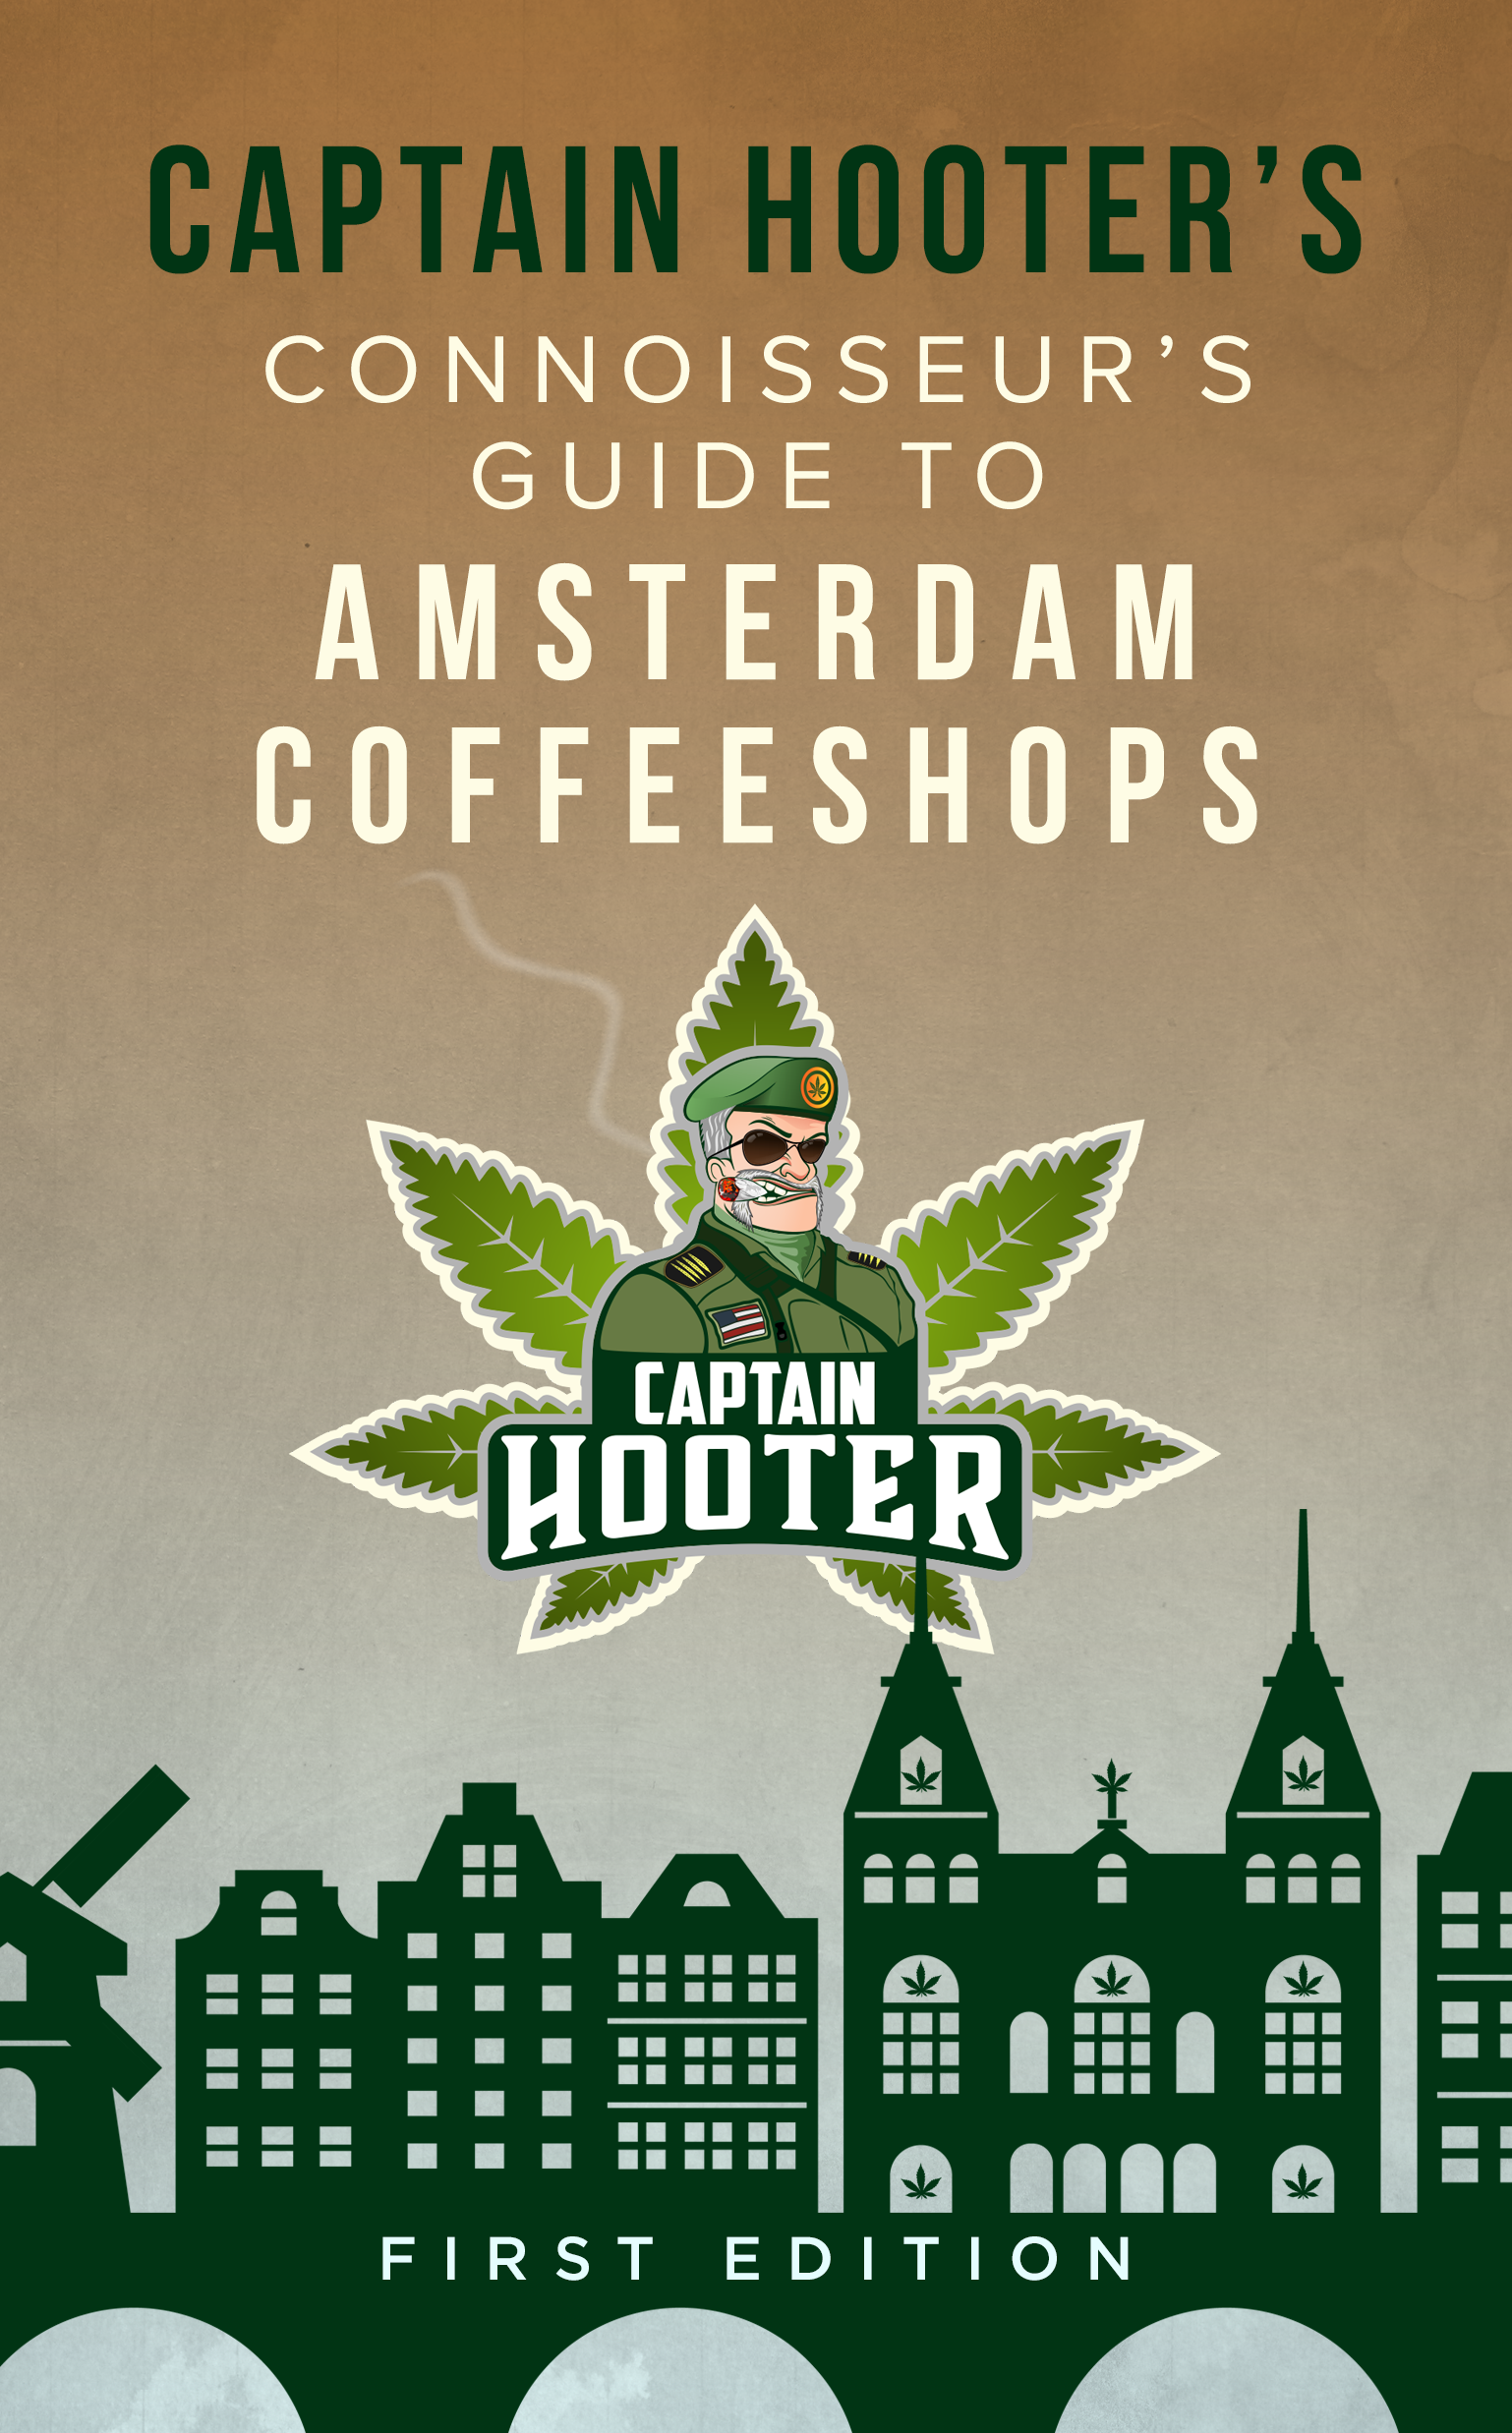 Captain Hooter's “Connoisseur's Guide to Amsterdam Coffeeshops” tops as the Sunbury Press bestseller for February